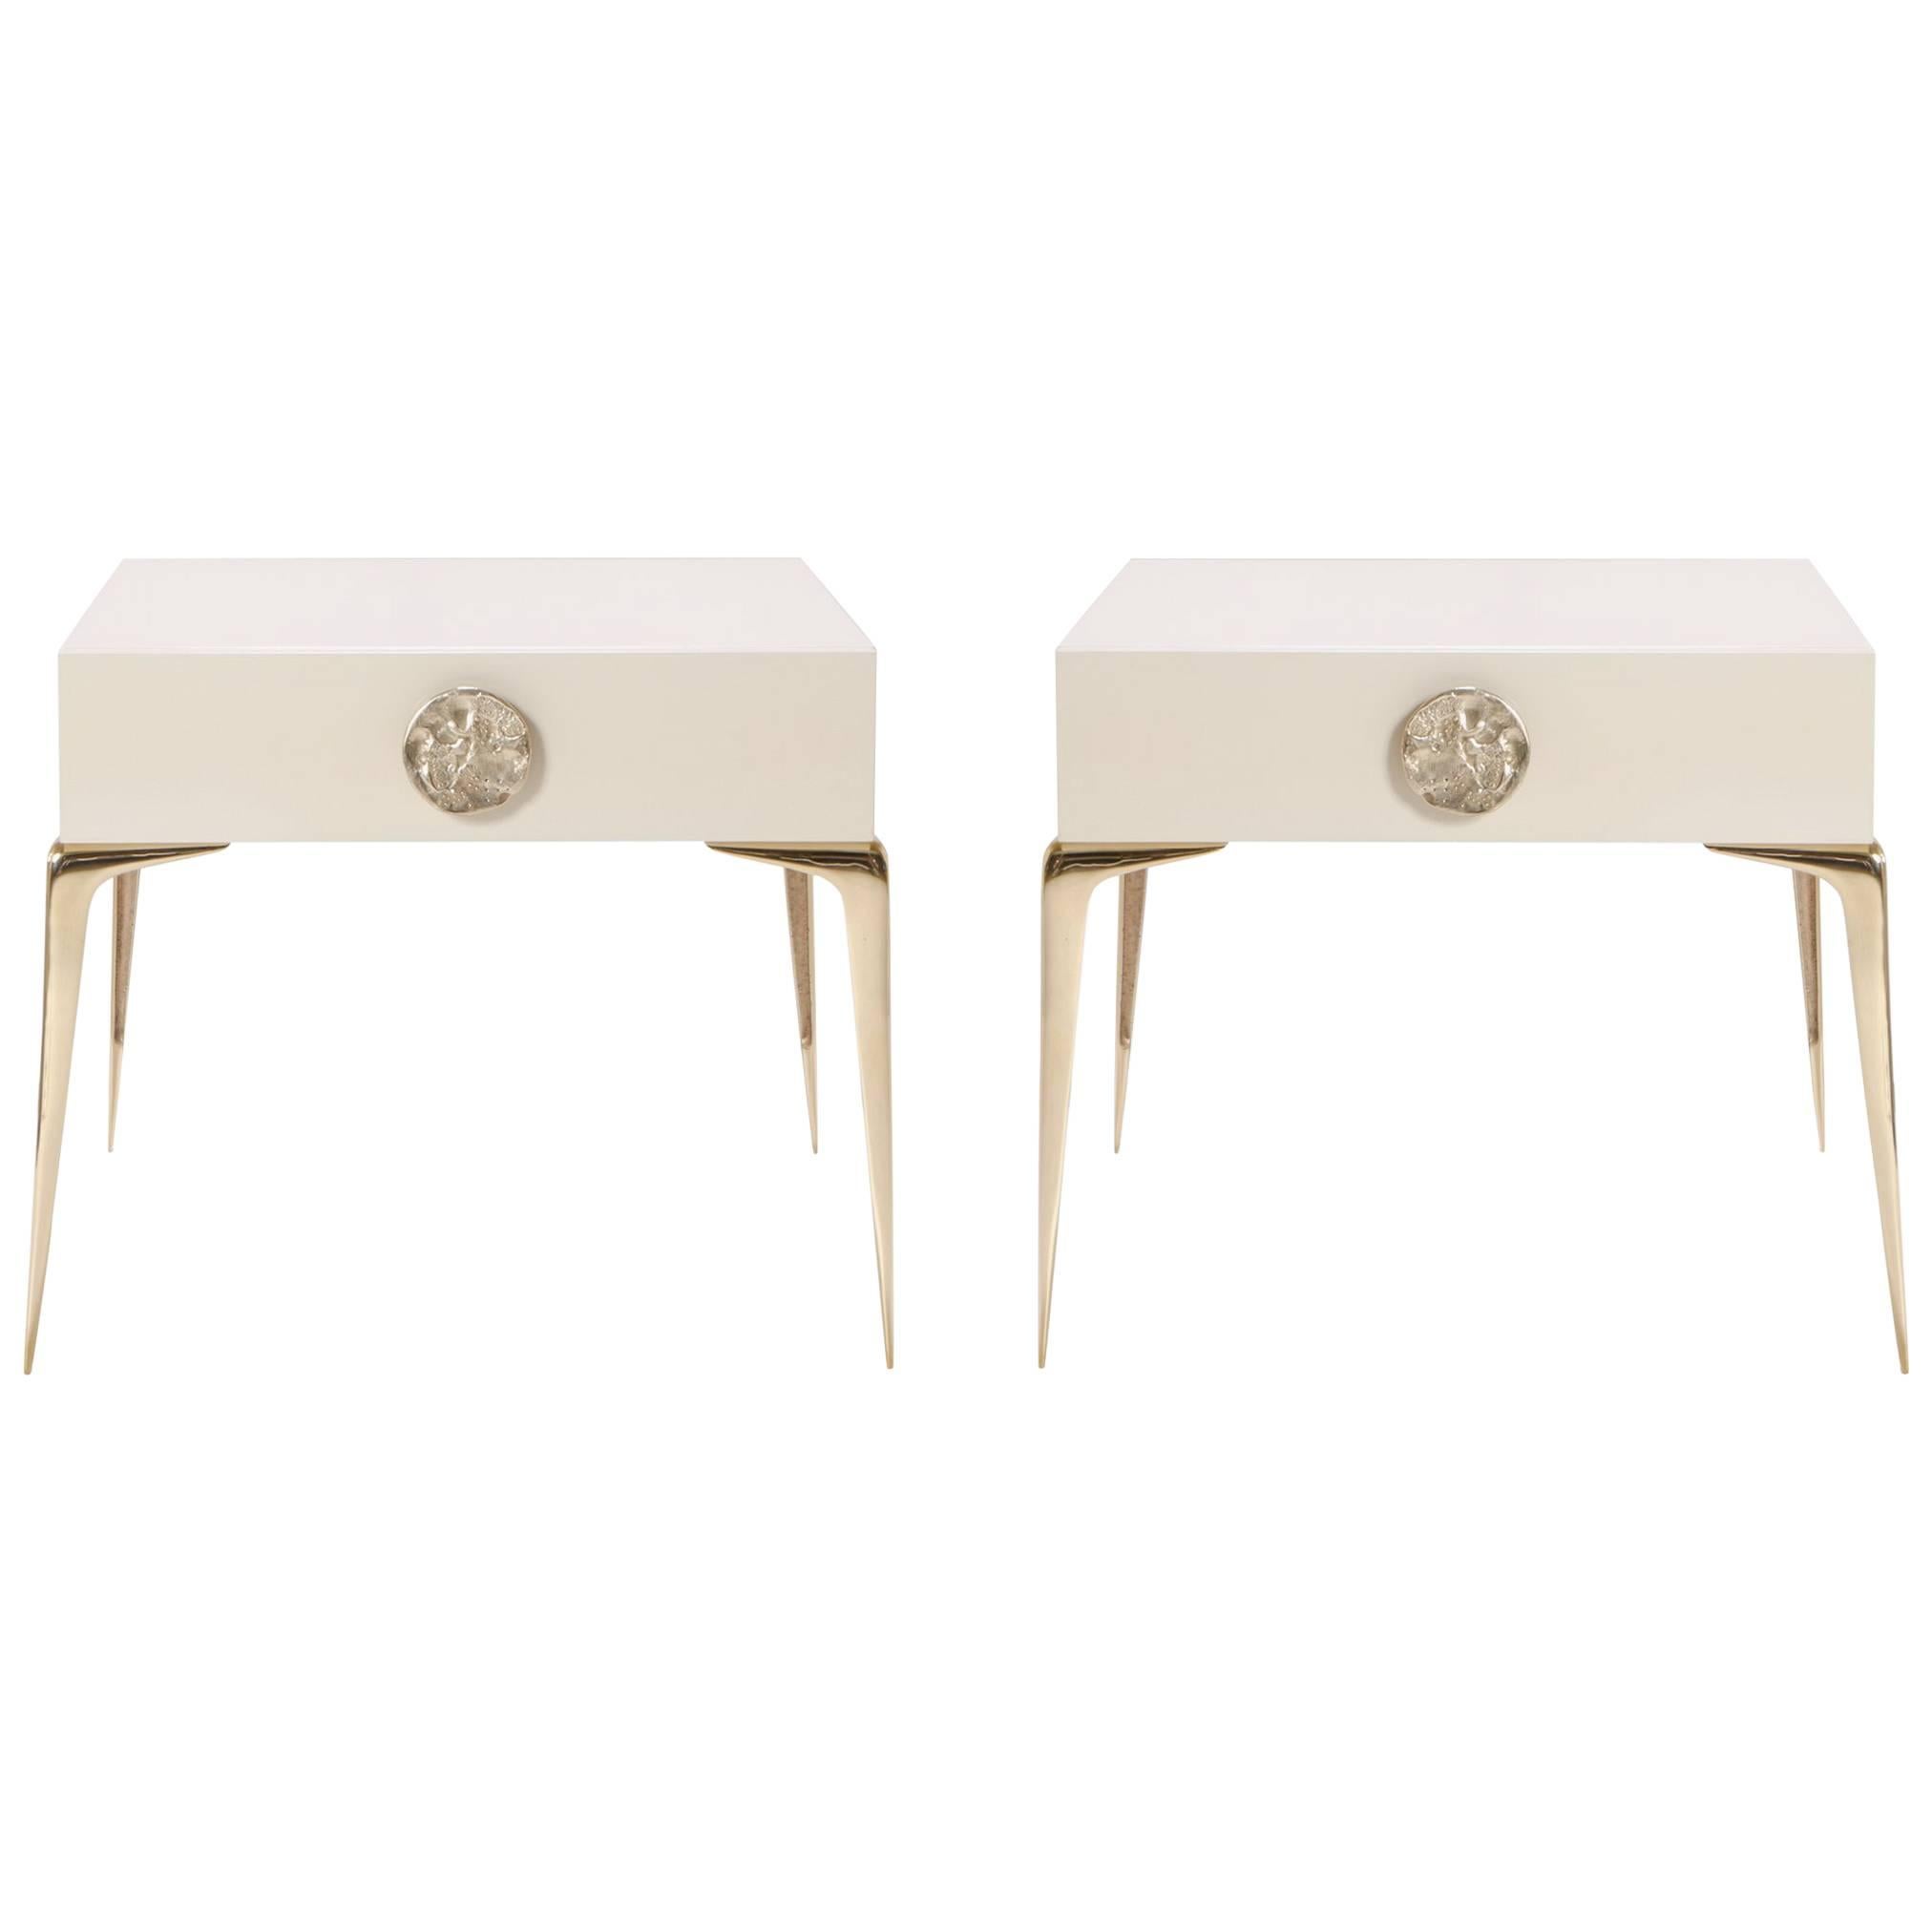 Colette Petite Brass Nightstands in Ivory Lacquer by Montage, Pair